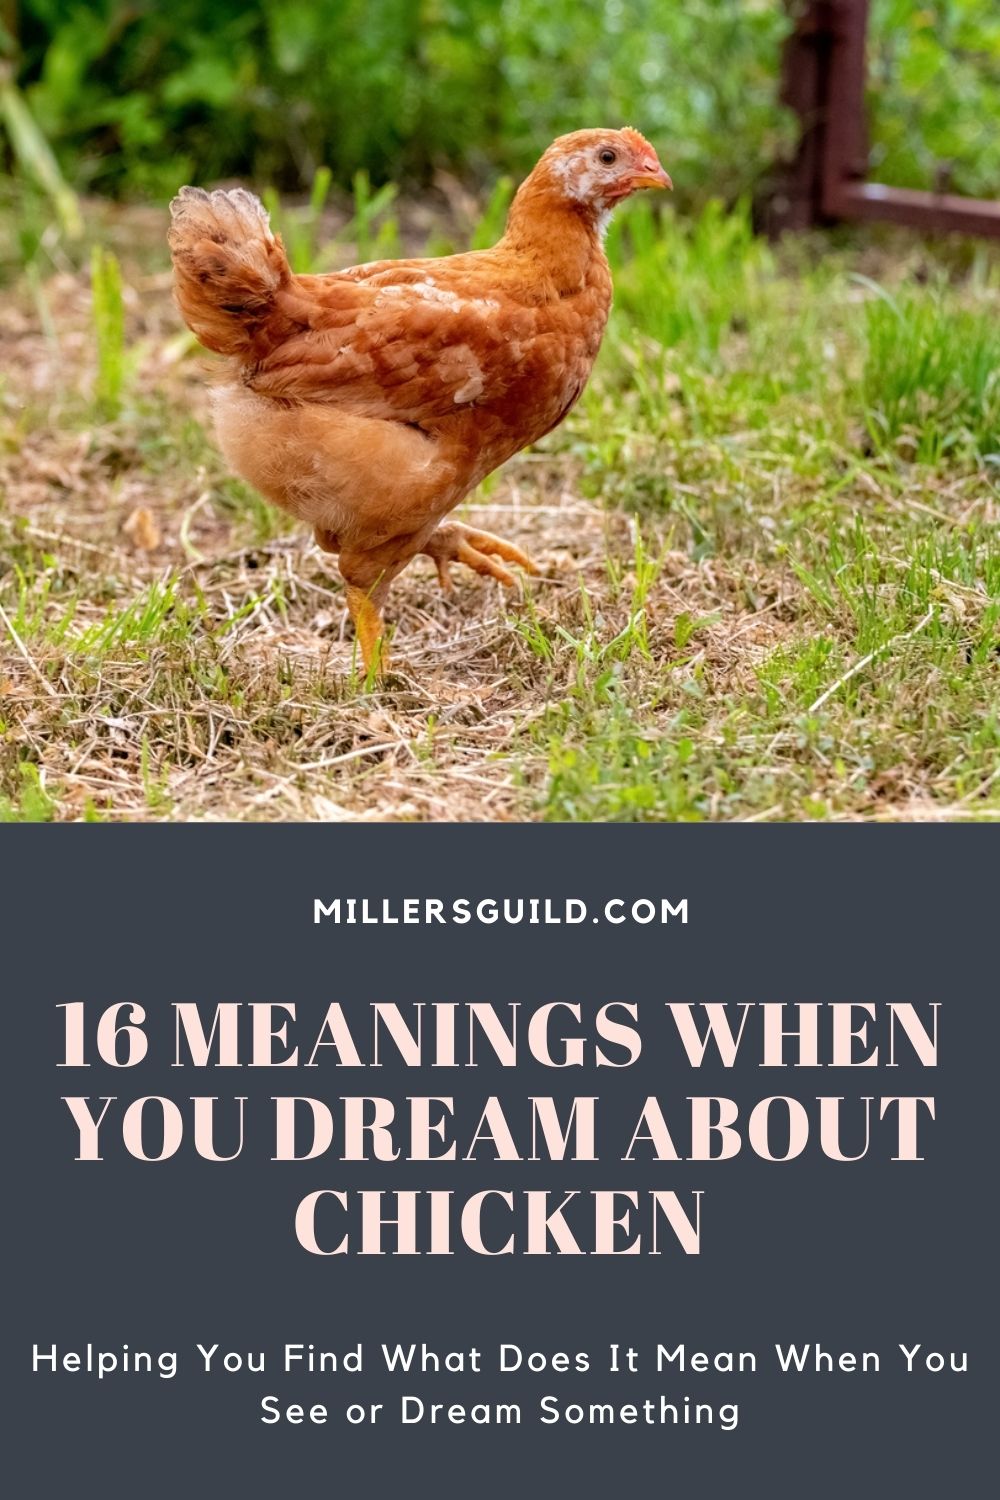 Symbolic Significance Of Baby Chicks In Dreams